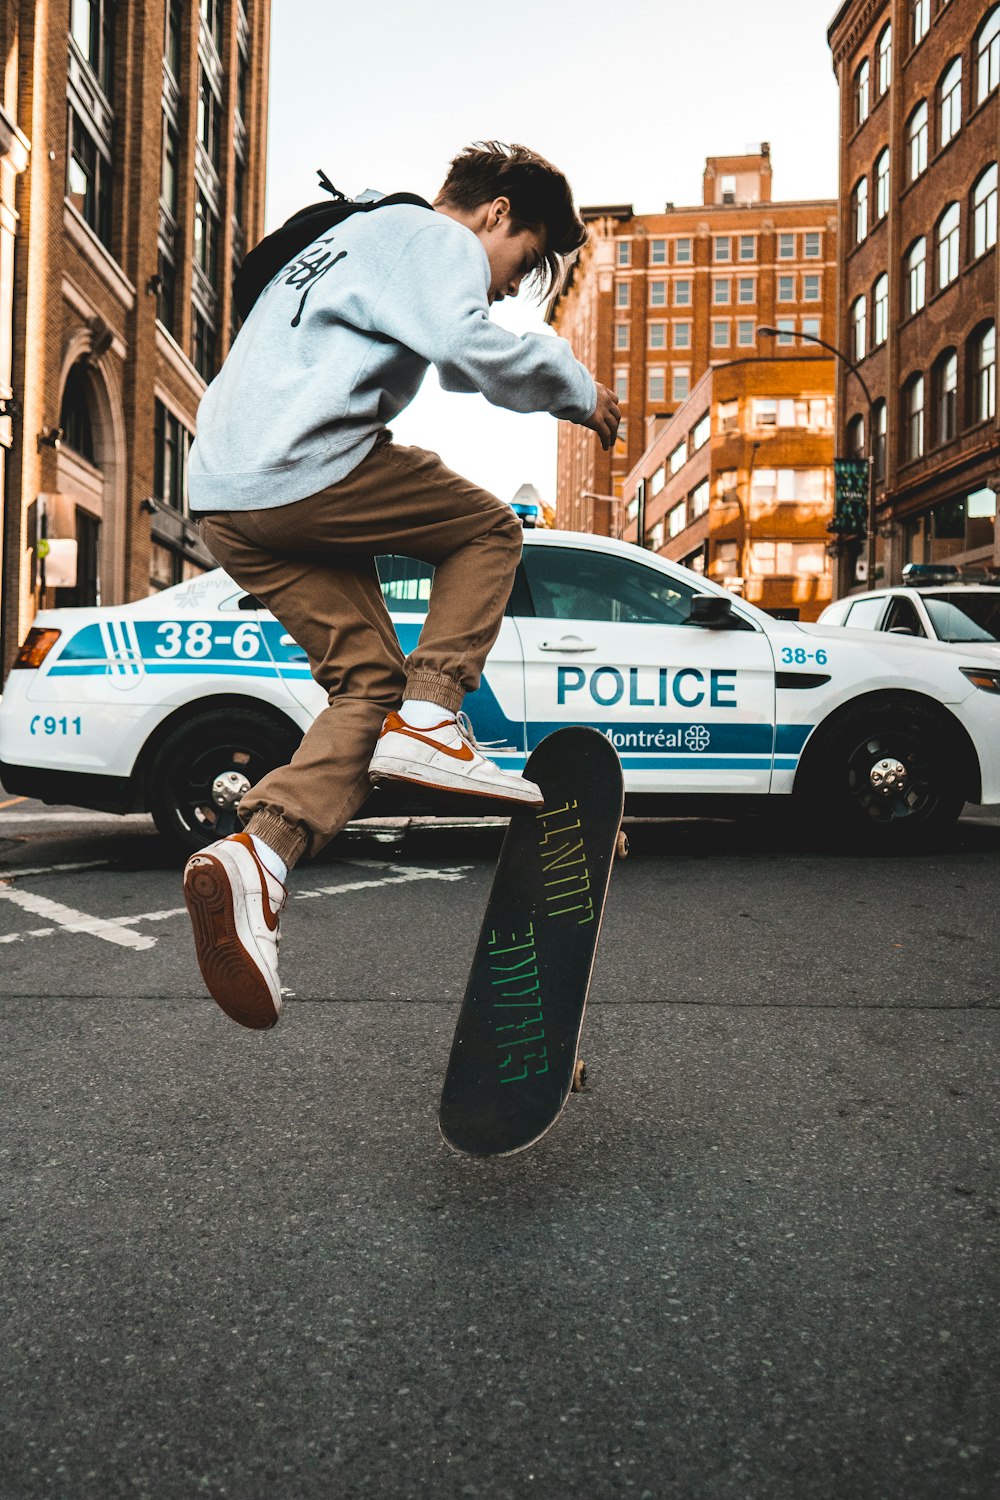 man doing exhibition on skateboard in front of police vehicle during daytime